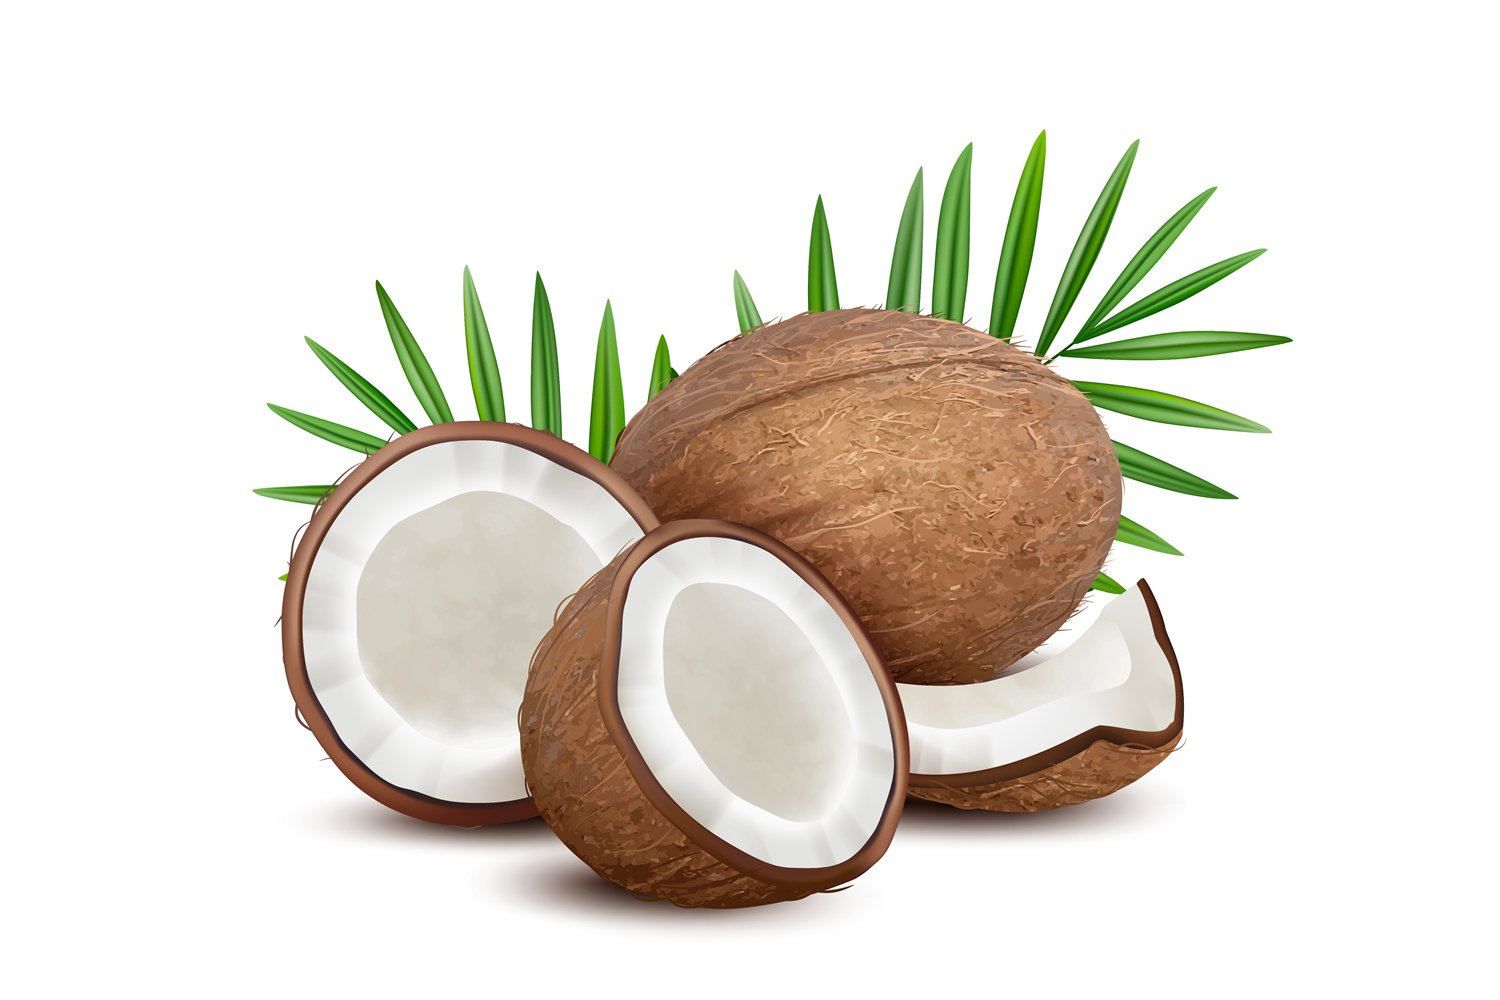 Classic coconuts on a white background.